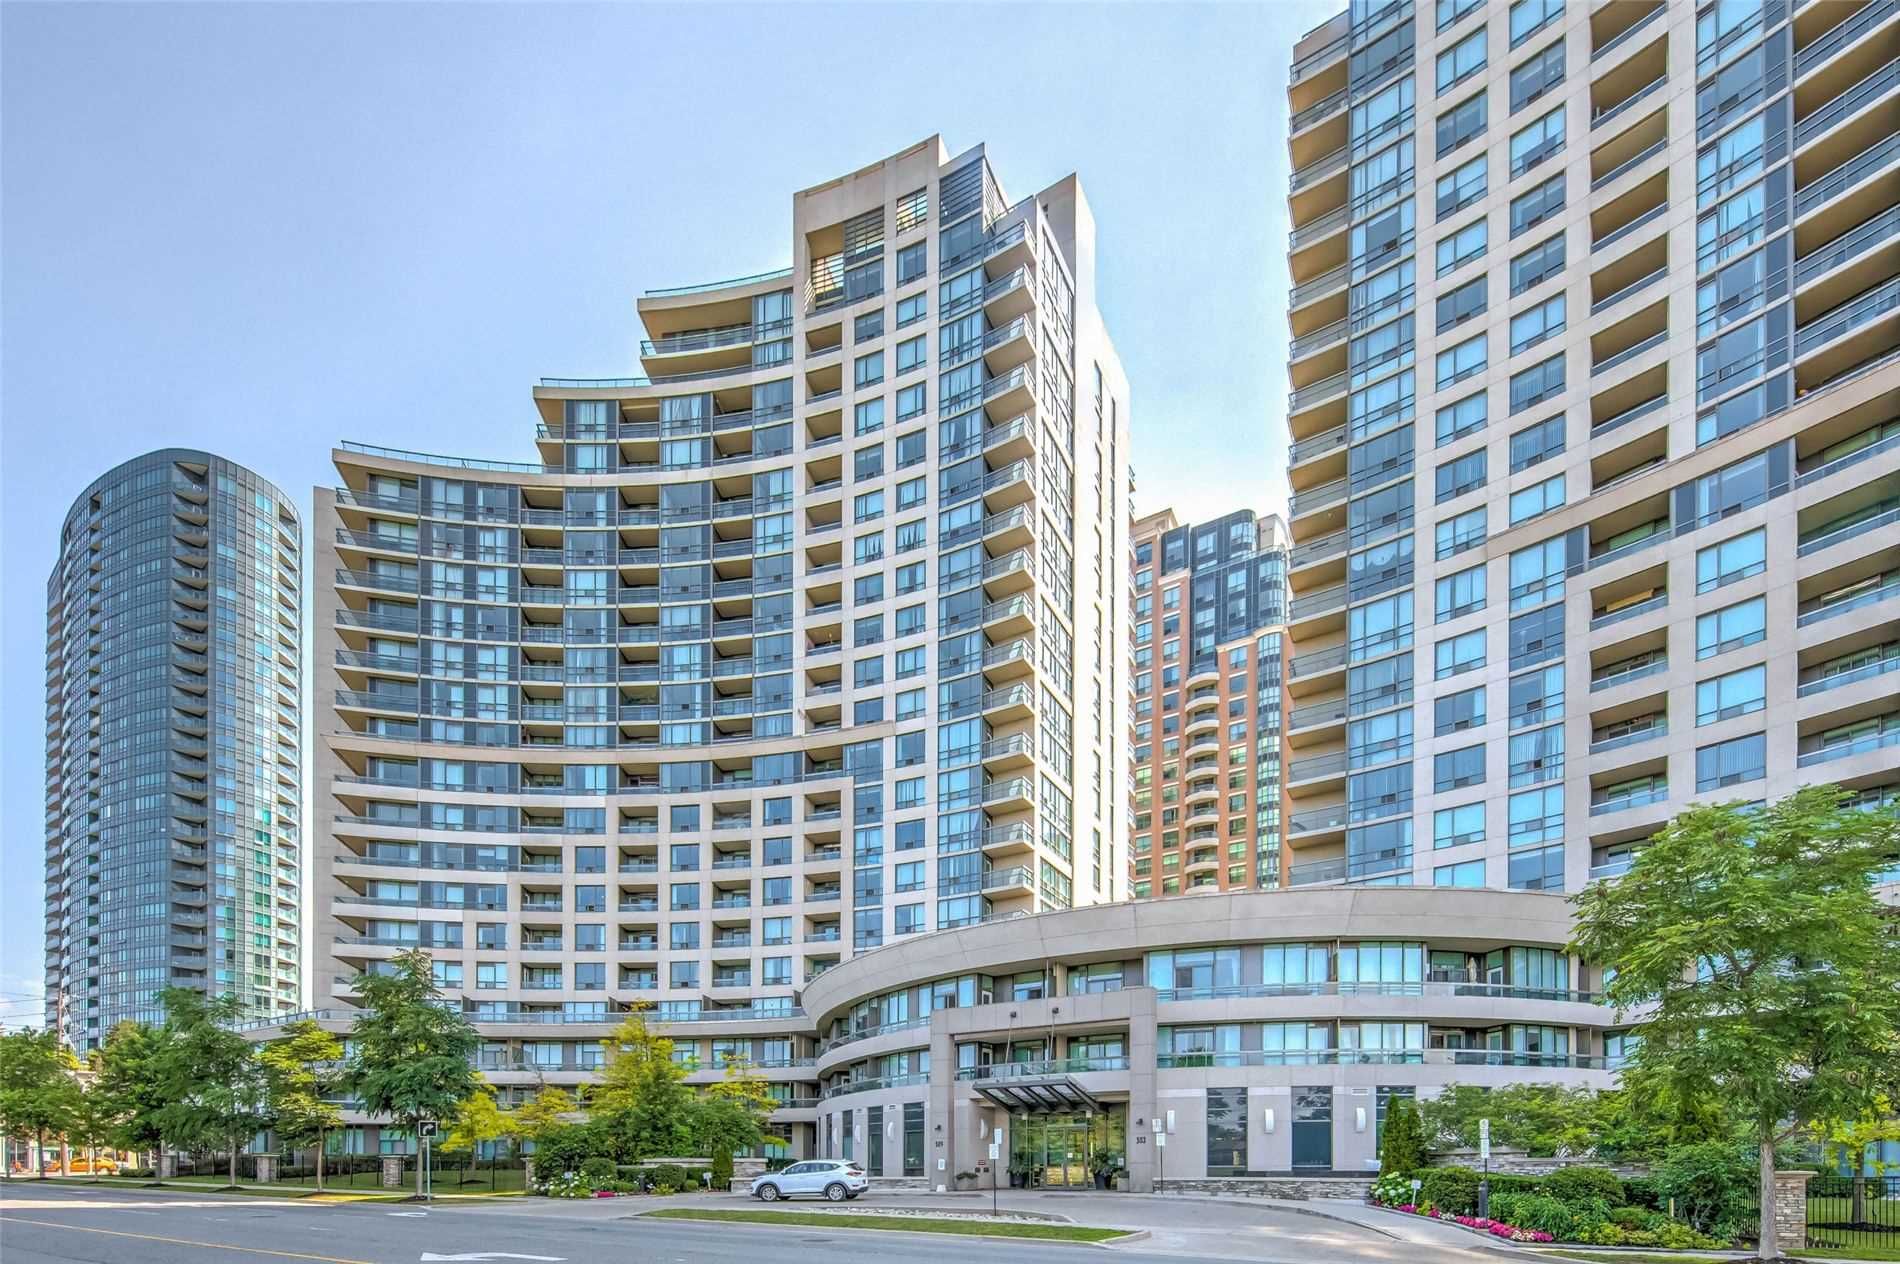 509 Beecroft Rd. This condo at The Continental Condos is located in  North York, Toronto - image #1 of 2 by Strata.ca